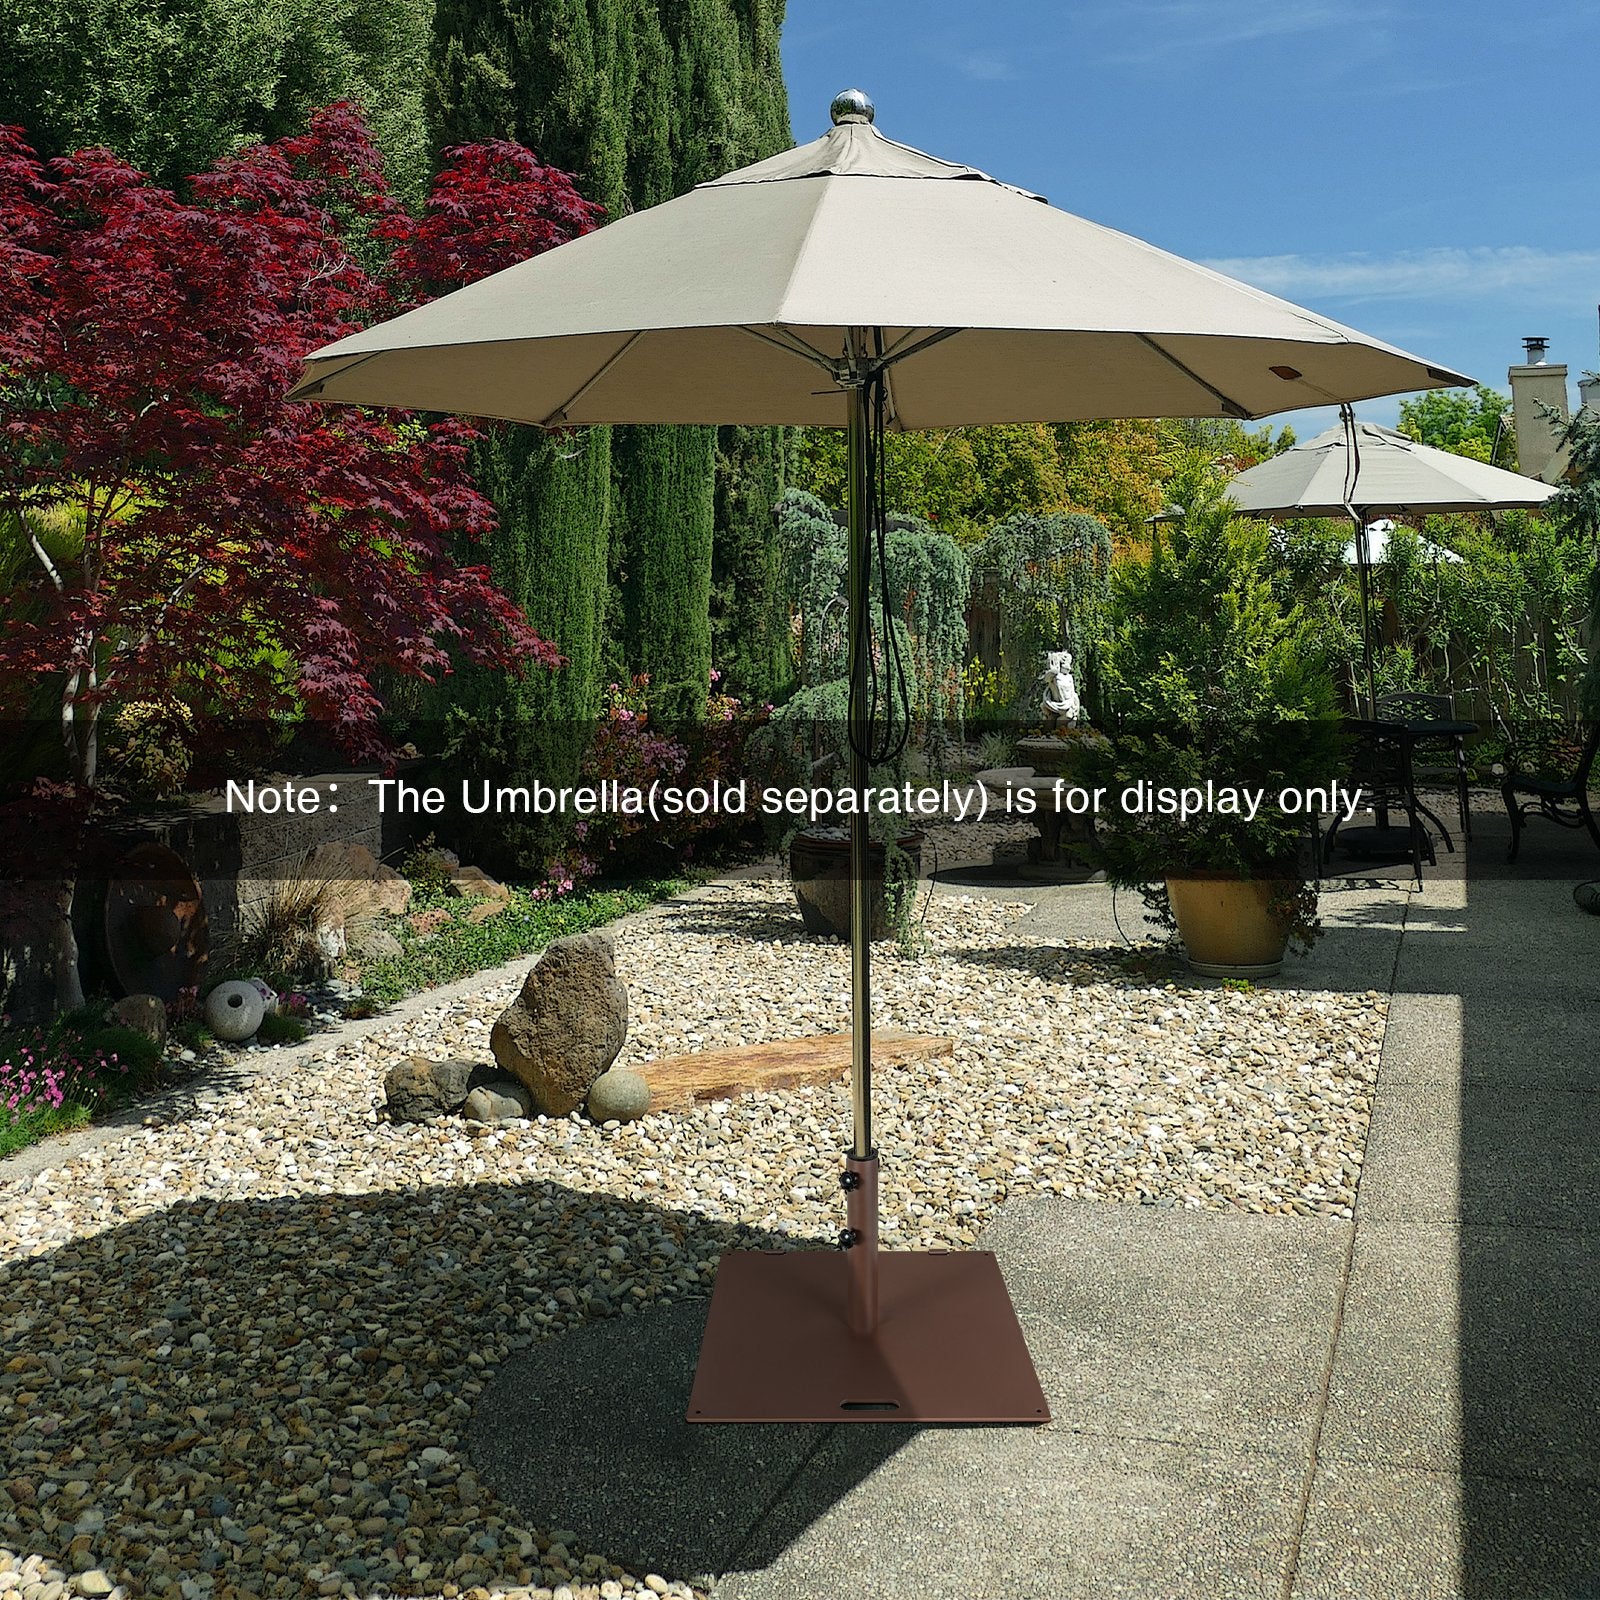 50 LBS Weighted 24 Inch Square Patio Umbrella Base, Brown - Gallery Canada